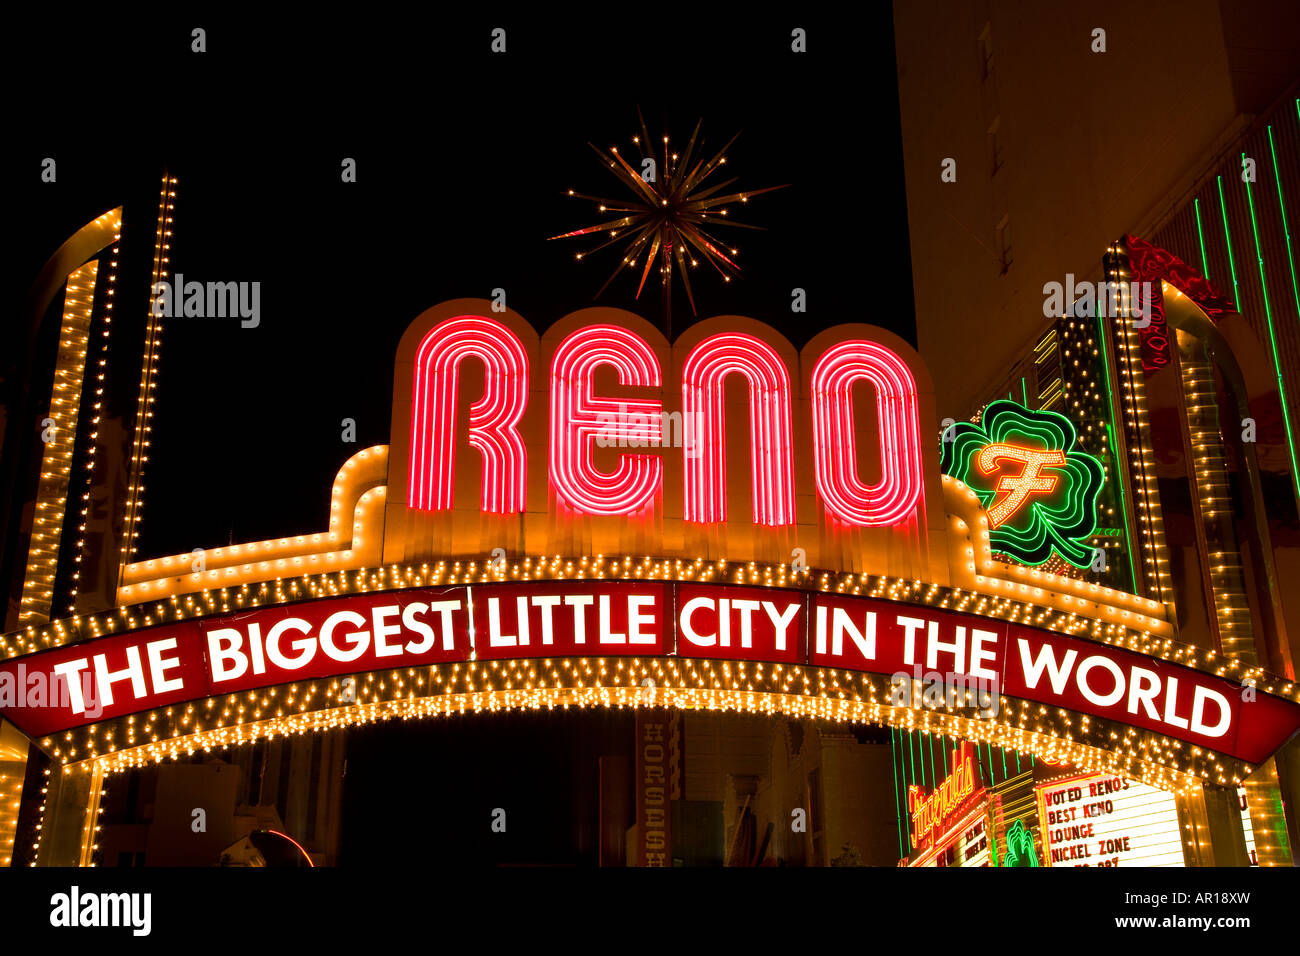 The Biggest Little City in the World sign downtown Reno Nevada Stock Photo